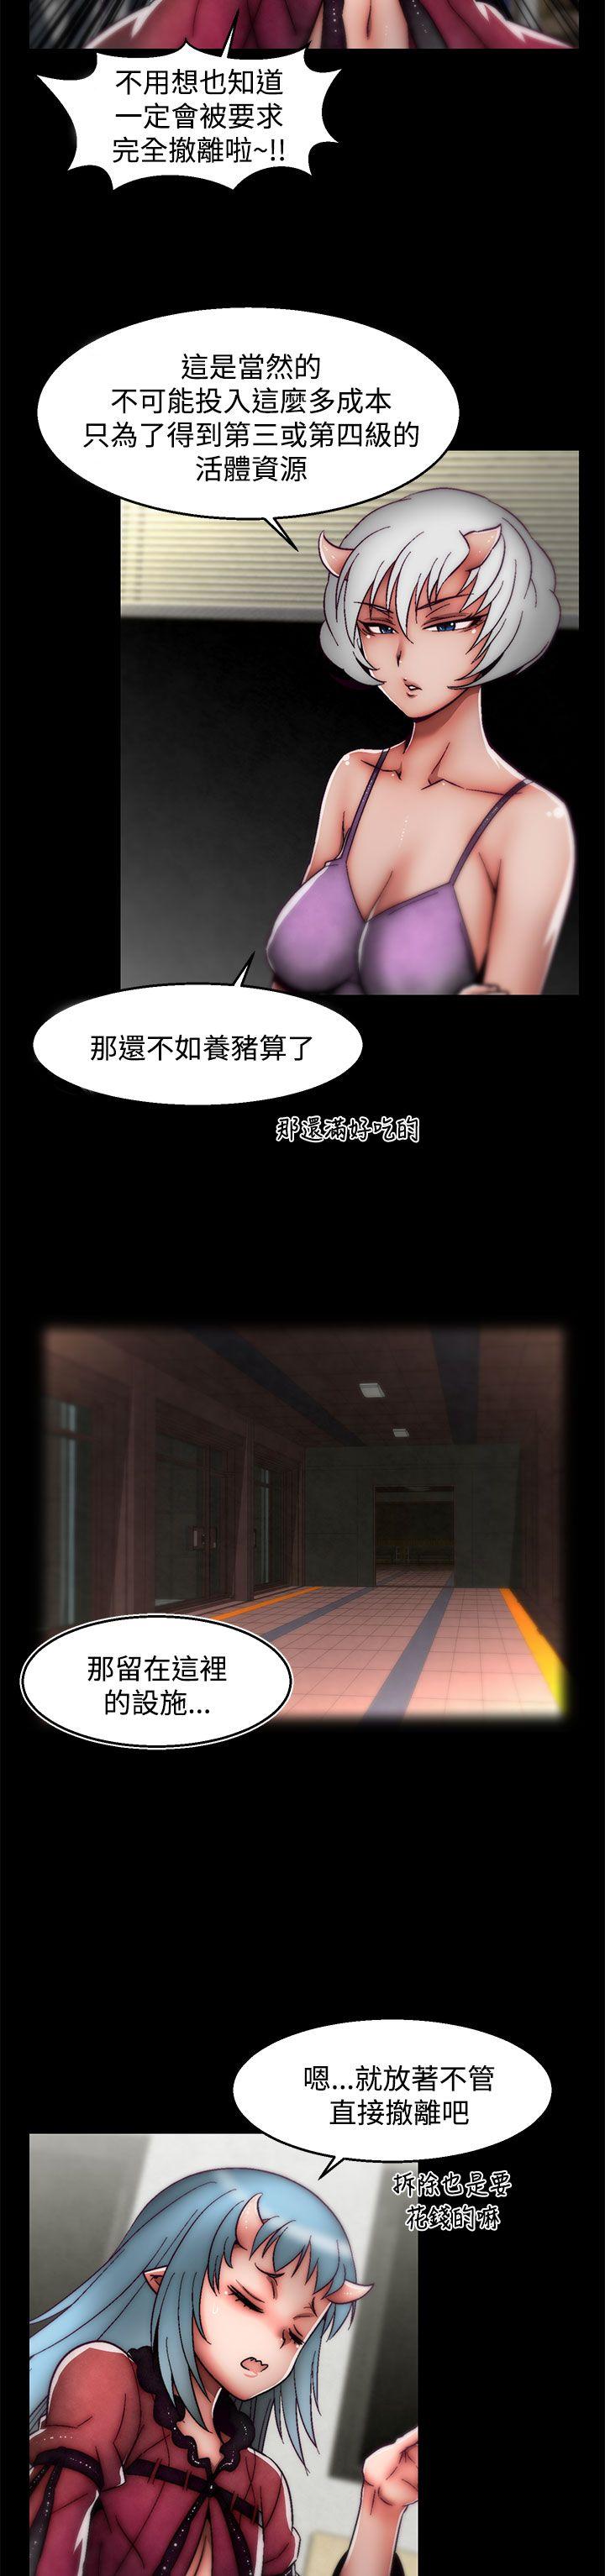 Cum In Mouth 啪啪啪调教所 后记1+后记2 Cocksuckers - Page 7